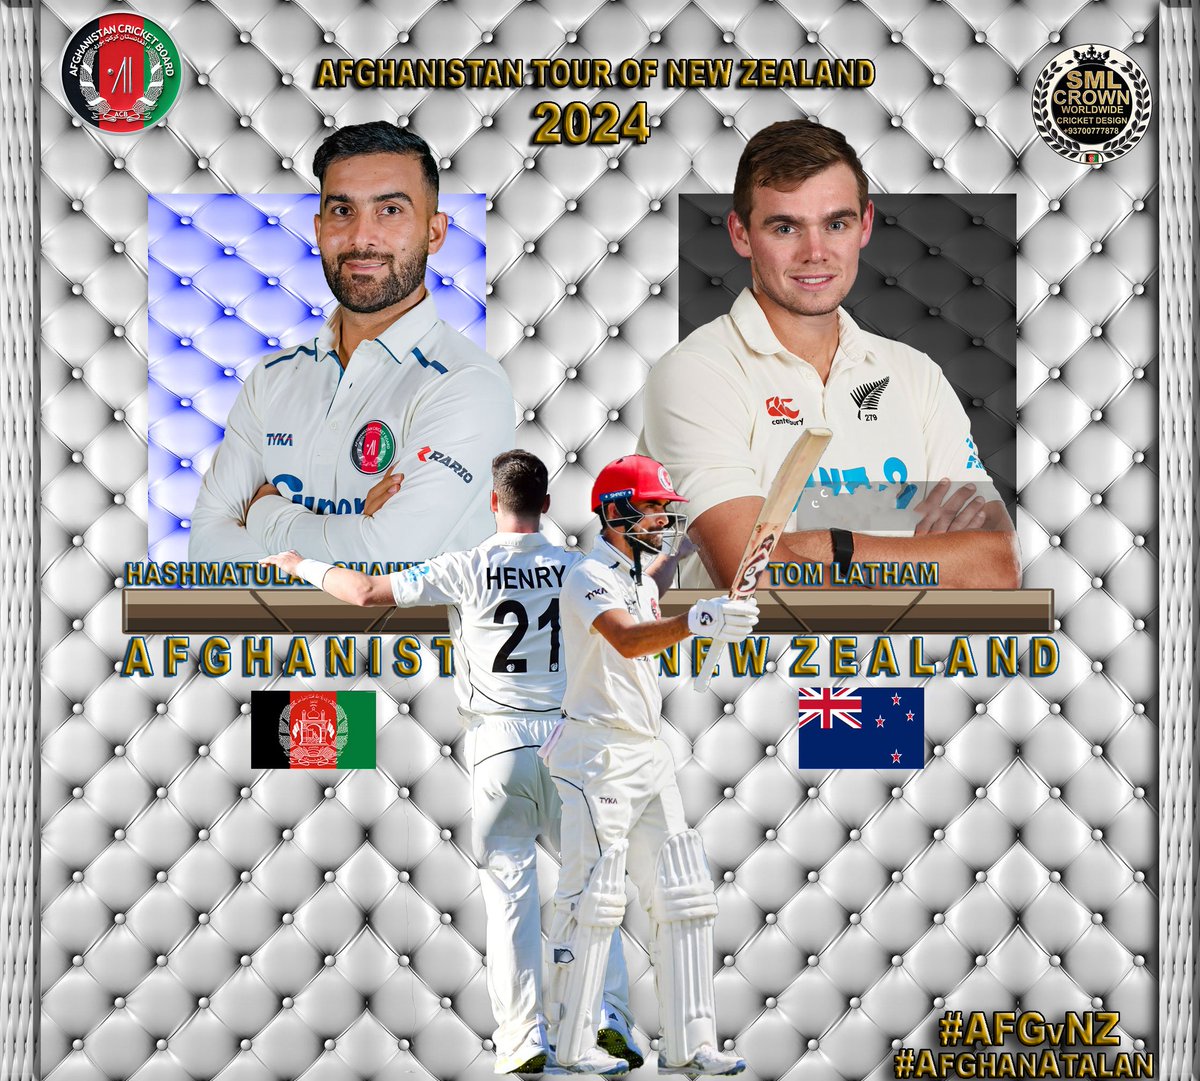 Breaking Big News!
Afghan Atalan, is planning to schedule an red ball match with blackcaps, so wish them, and best of luck & thank you very much ACB. @ACBofficials @MAsgharAfghan @MirwaisAshraf16 @Hashmat_50 🇦🇫🏏🇳🇿

#AfghanAtalan | #AFGvNZ #testcricket